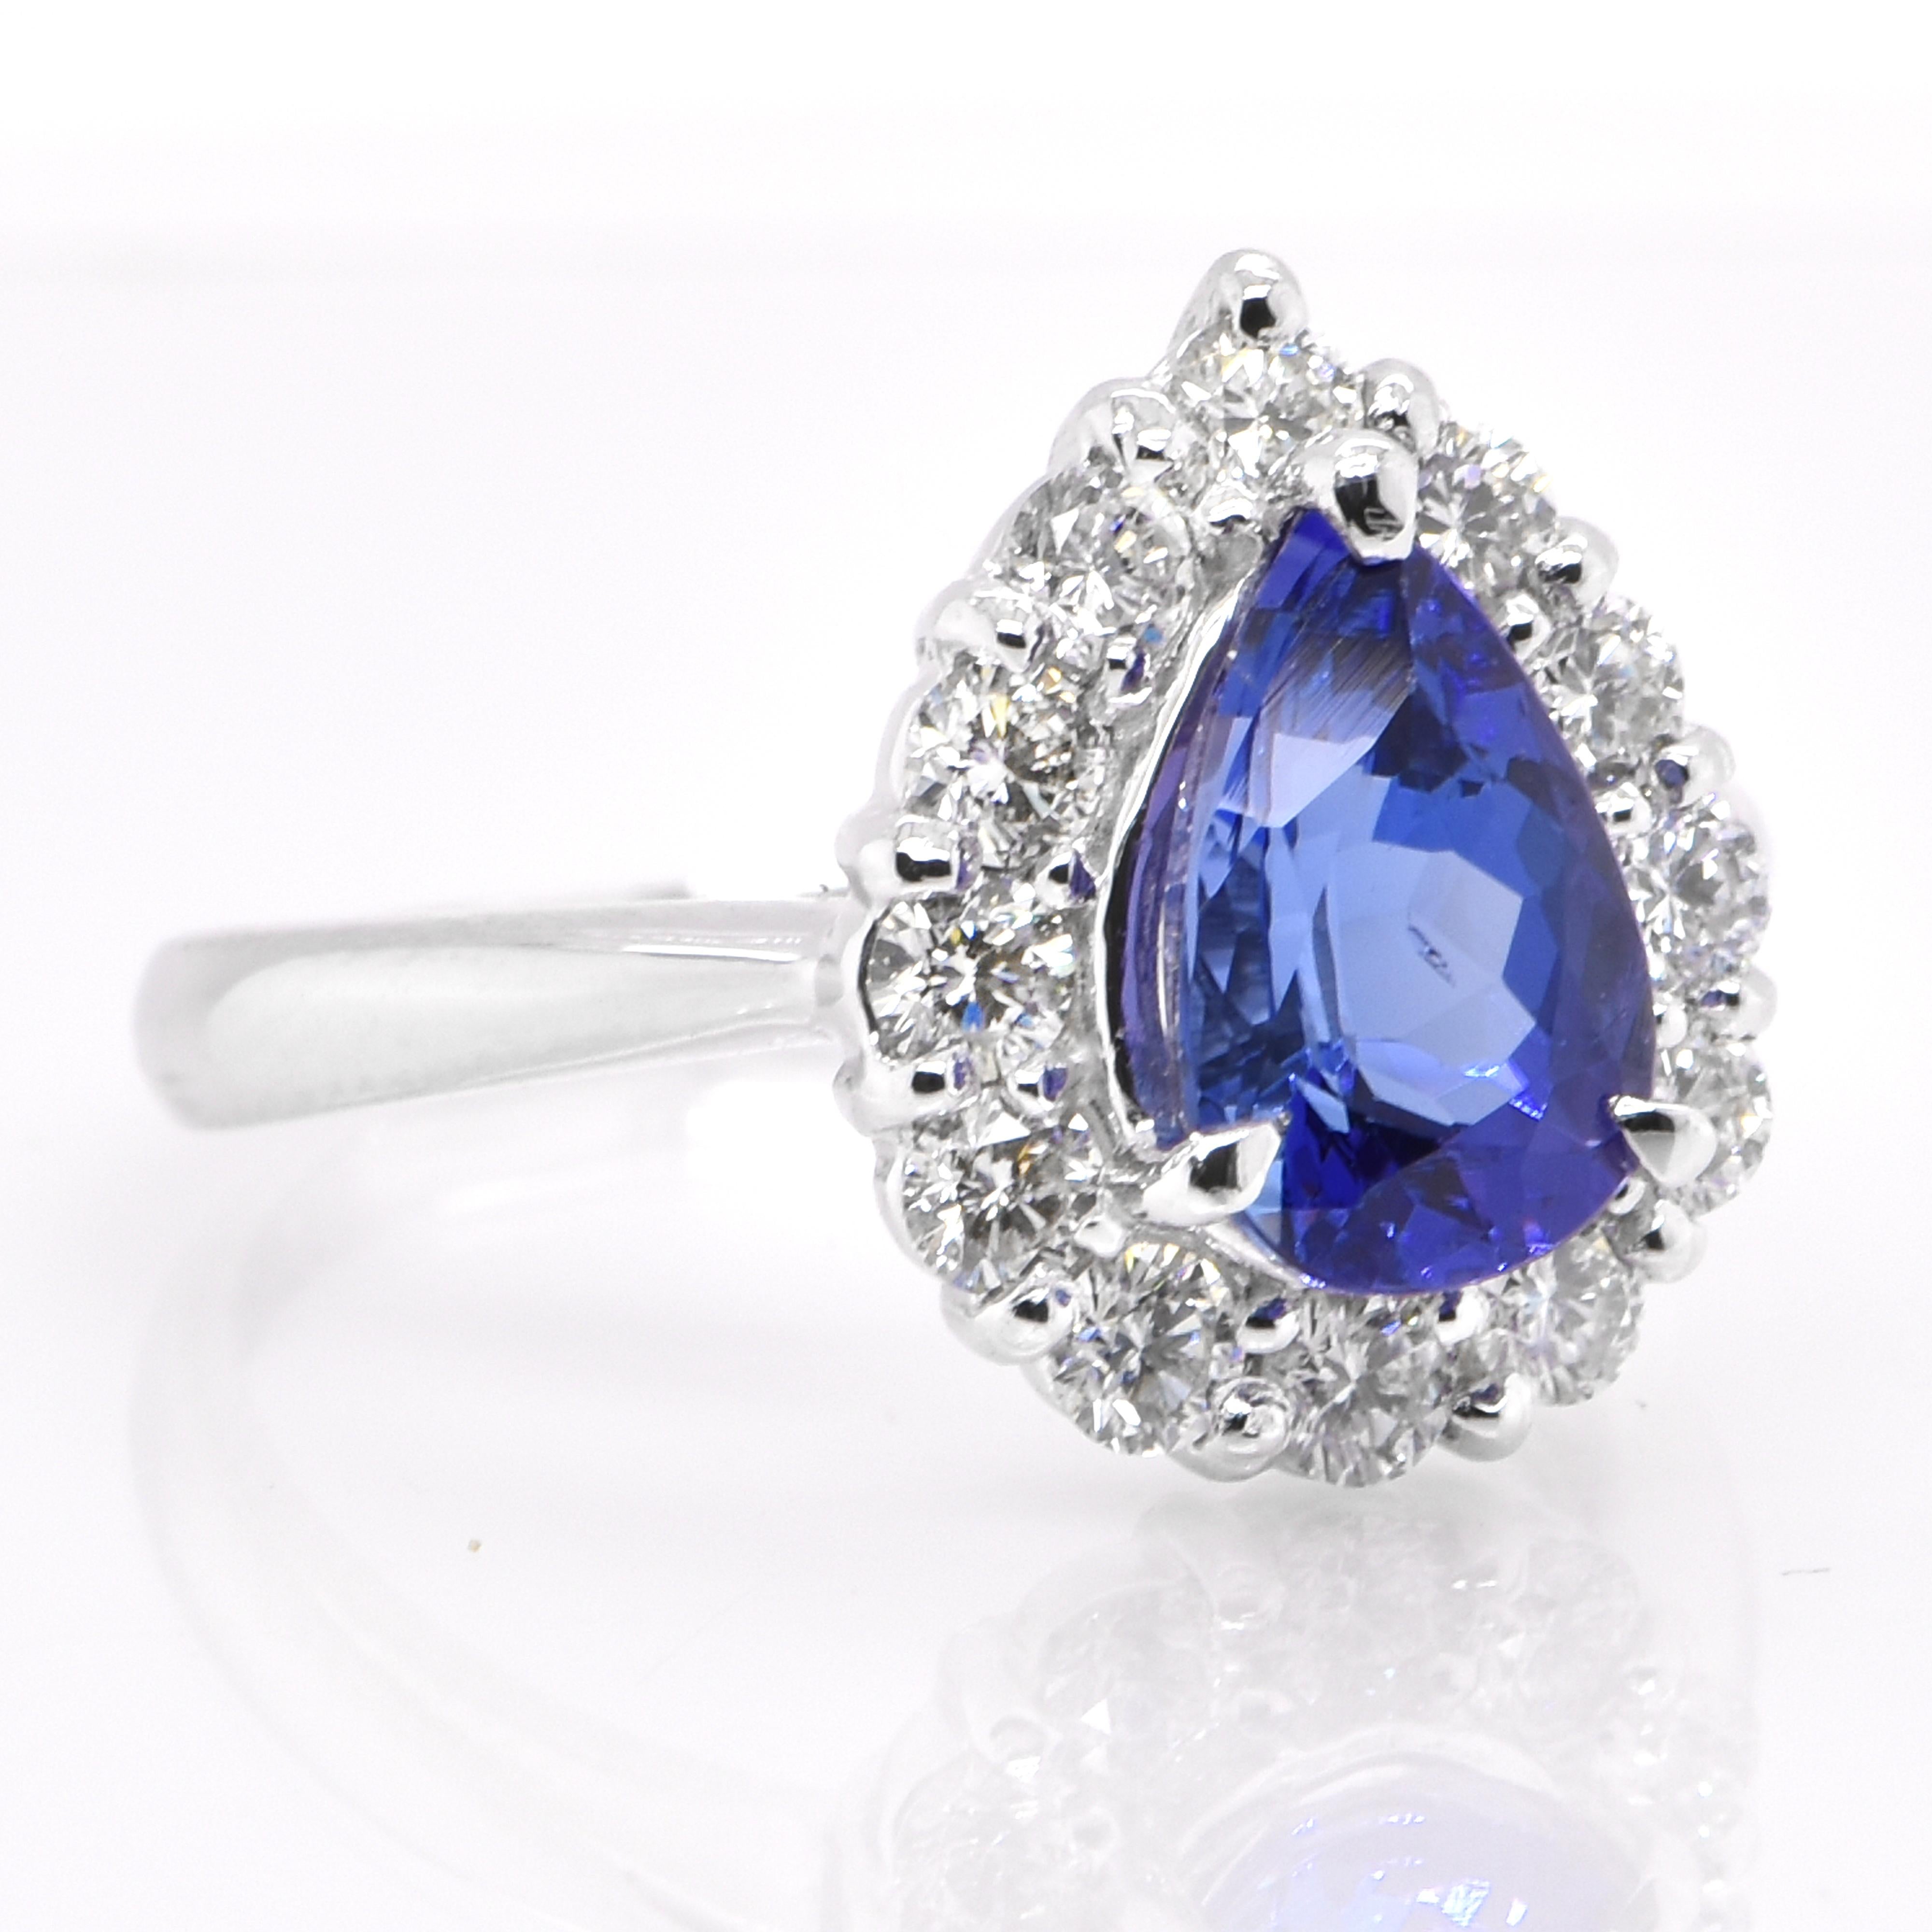 Modern 1.69 Carat Natural Pear Cut AAA+ Tanzanite and Diamond Ring Set in Platinum For Sale